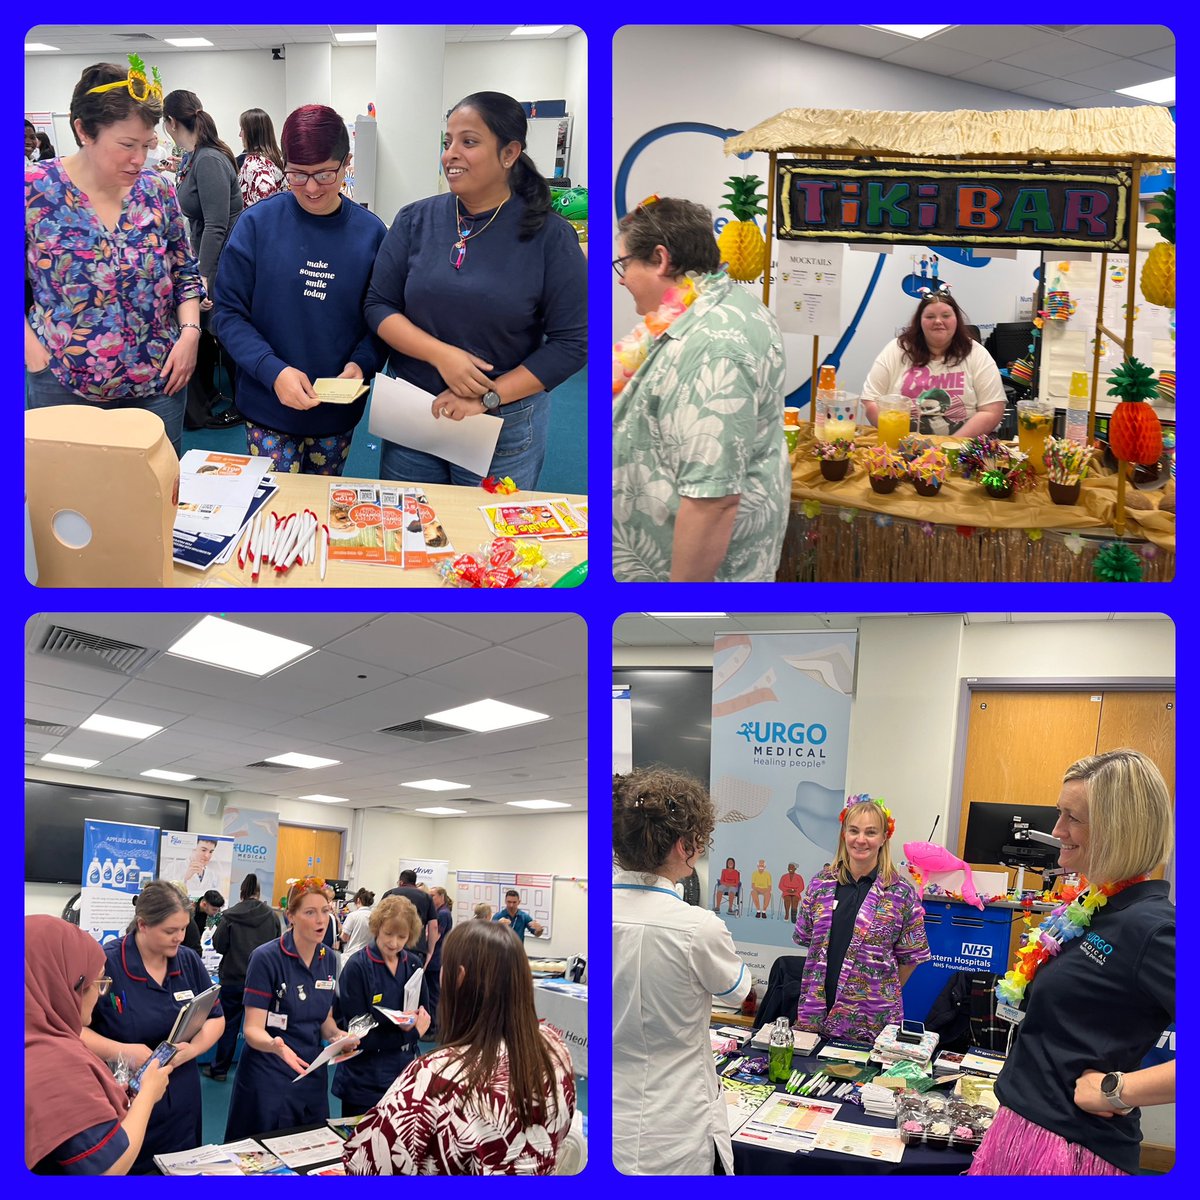 Fantastic day so far, great turn out from all the staff and our professional colleagues @SWRPC_SWAS @GWH_NHS #StopThePressure #Thinkskin #EveryContactCounts #Saferskin